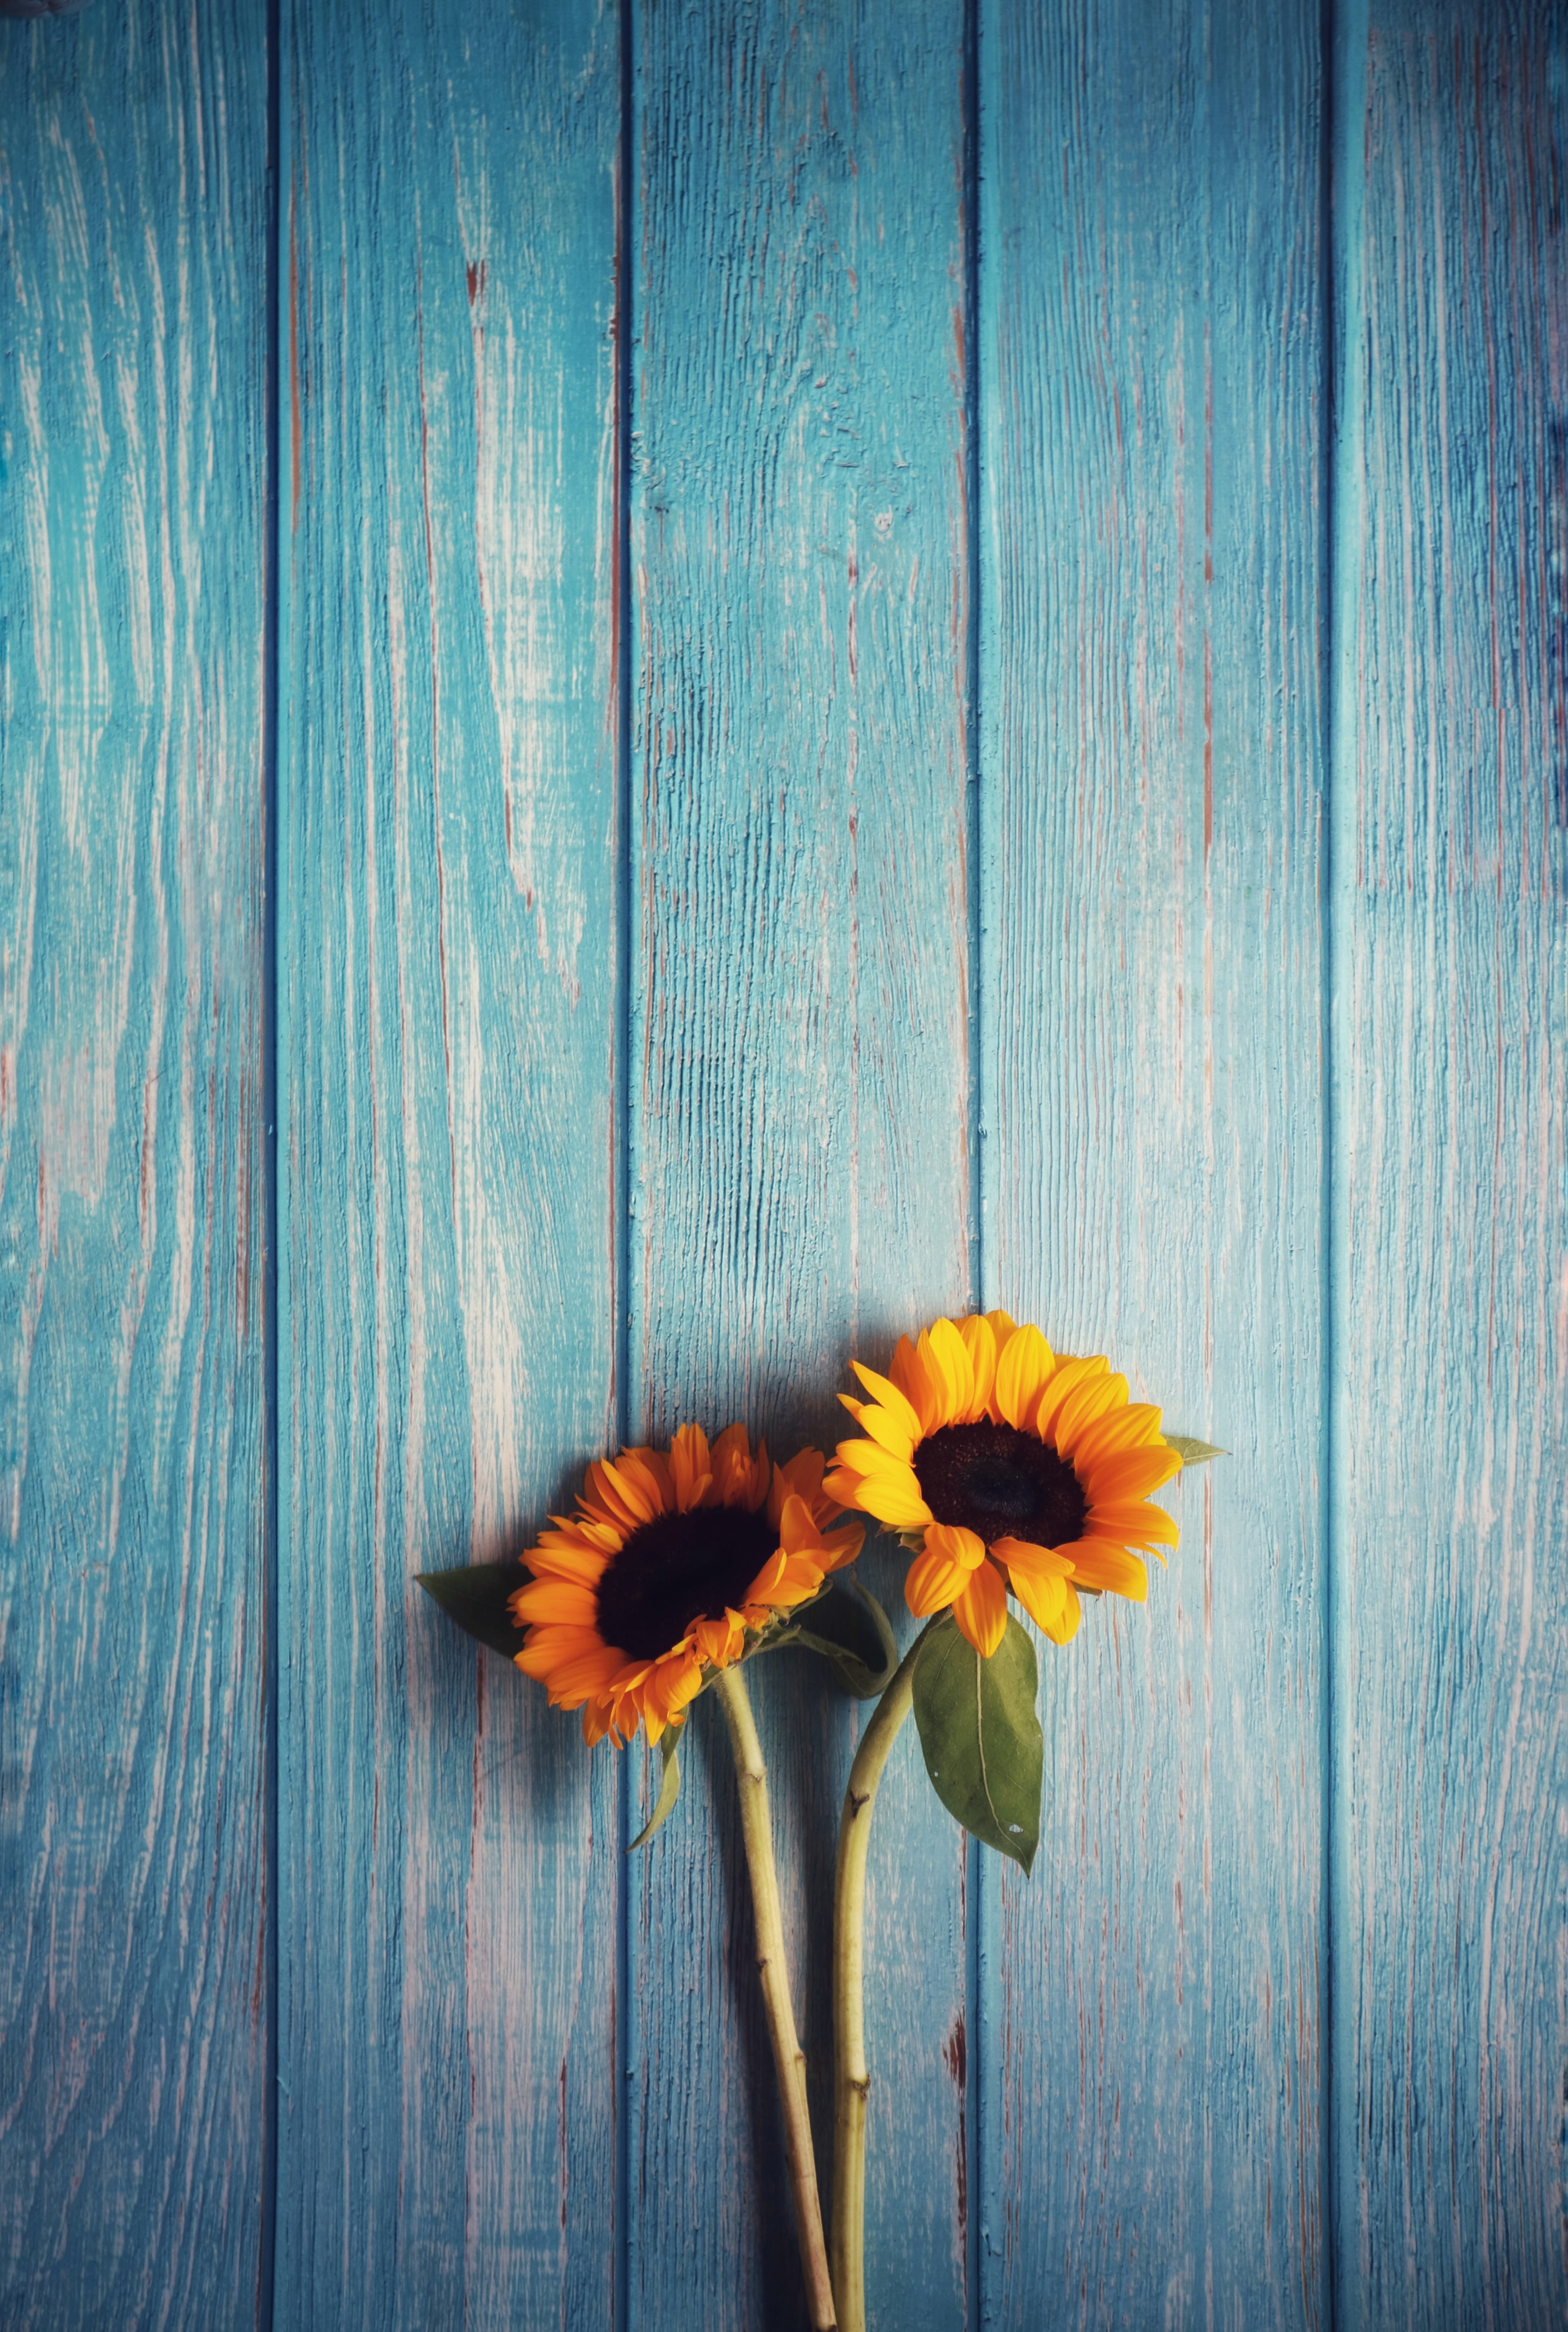 sunflowers, flowers, wood, wooden, texture